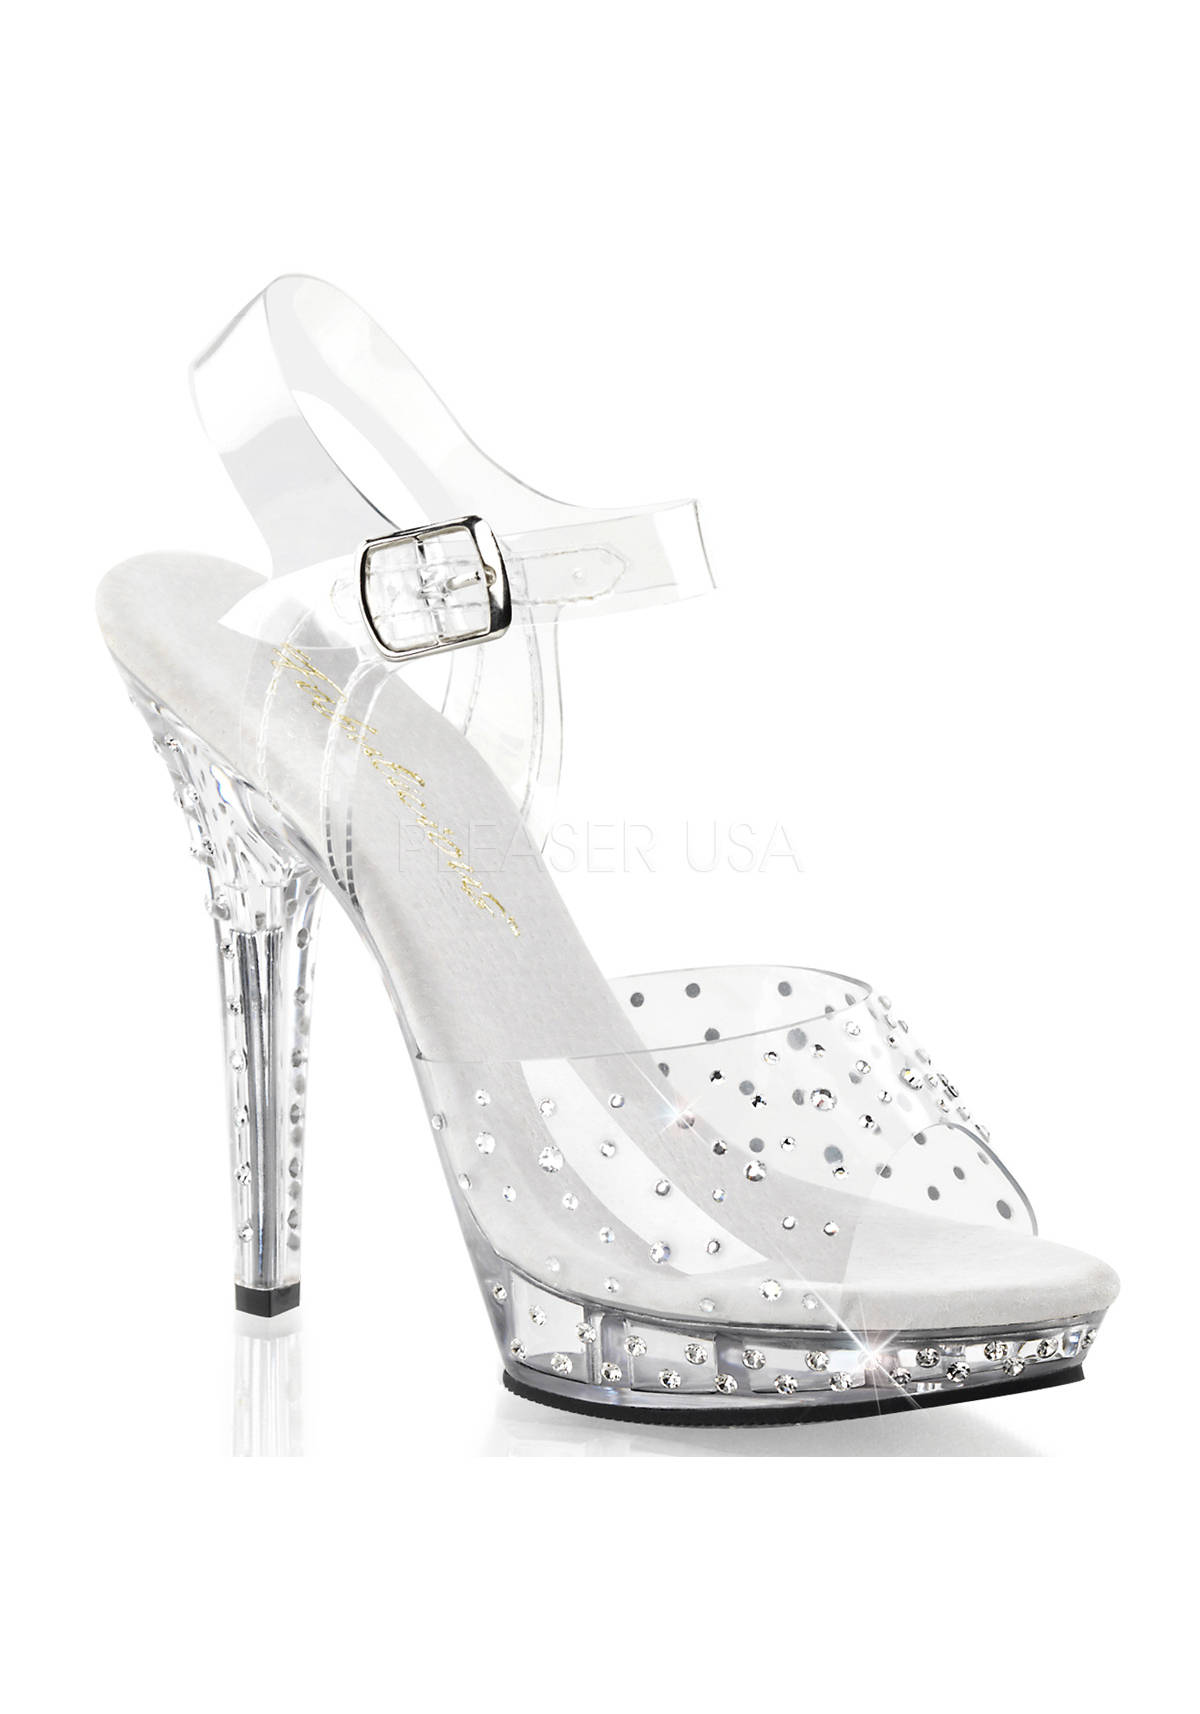 FABULICIOUS 5 Inch Heel, 3/4 Inch Platform Ankle Strap Sandal - Clear/Clear